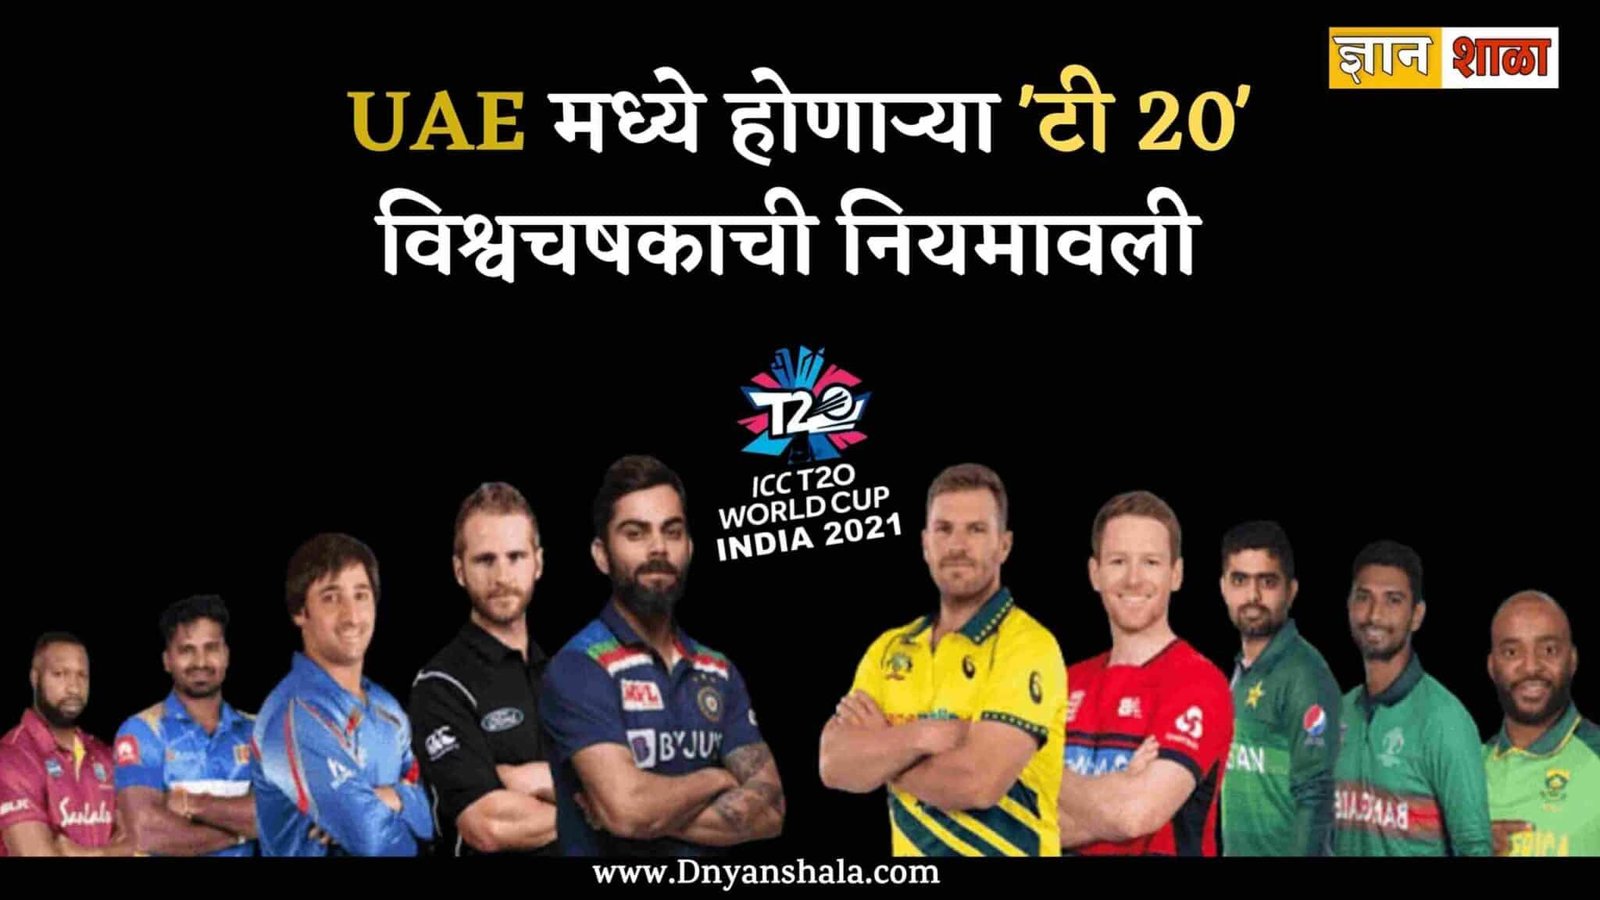 2021 T20 World Cup format, rules, venues, prize money